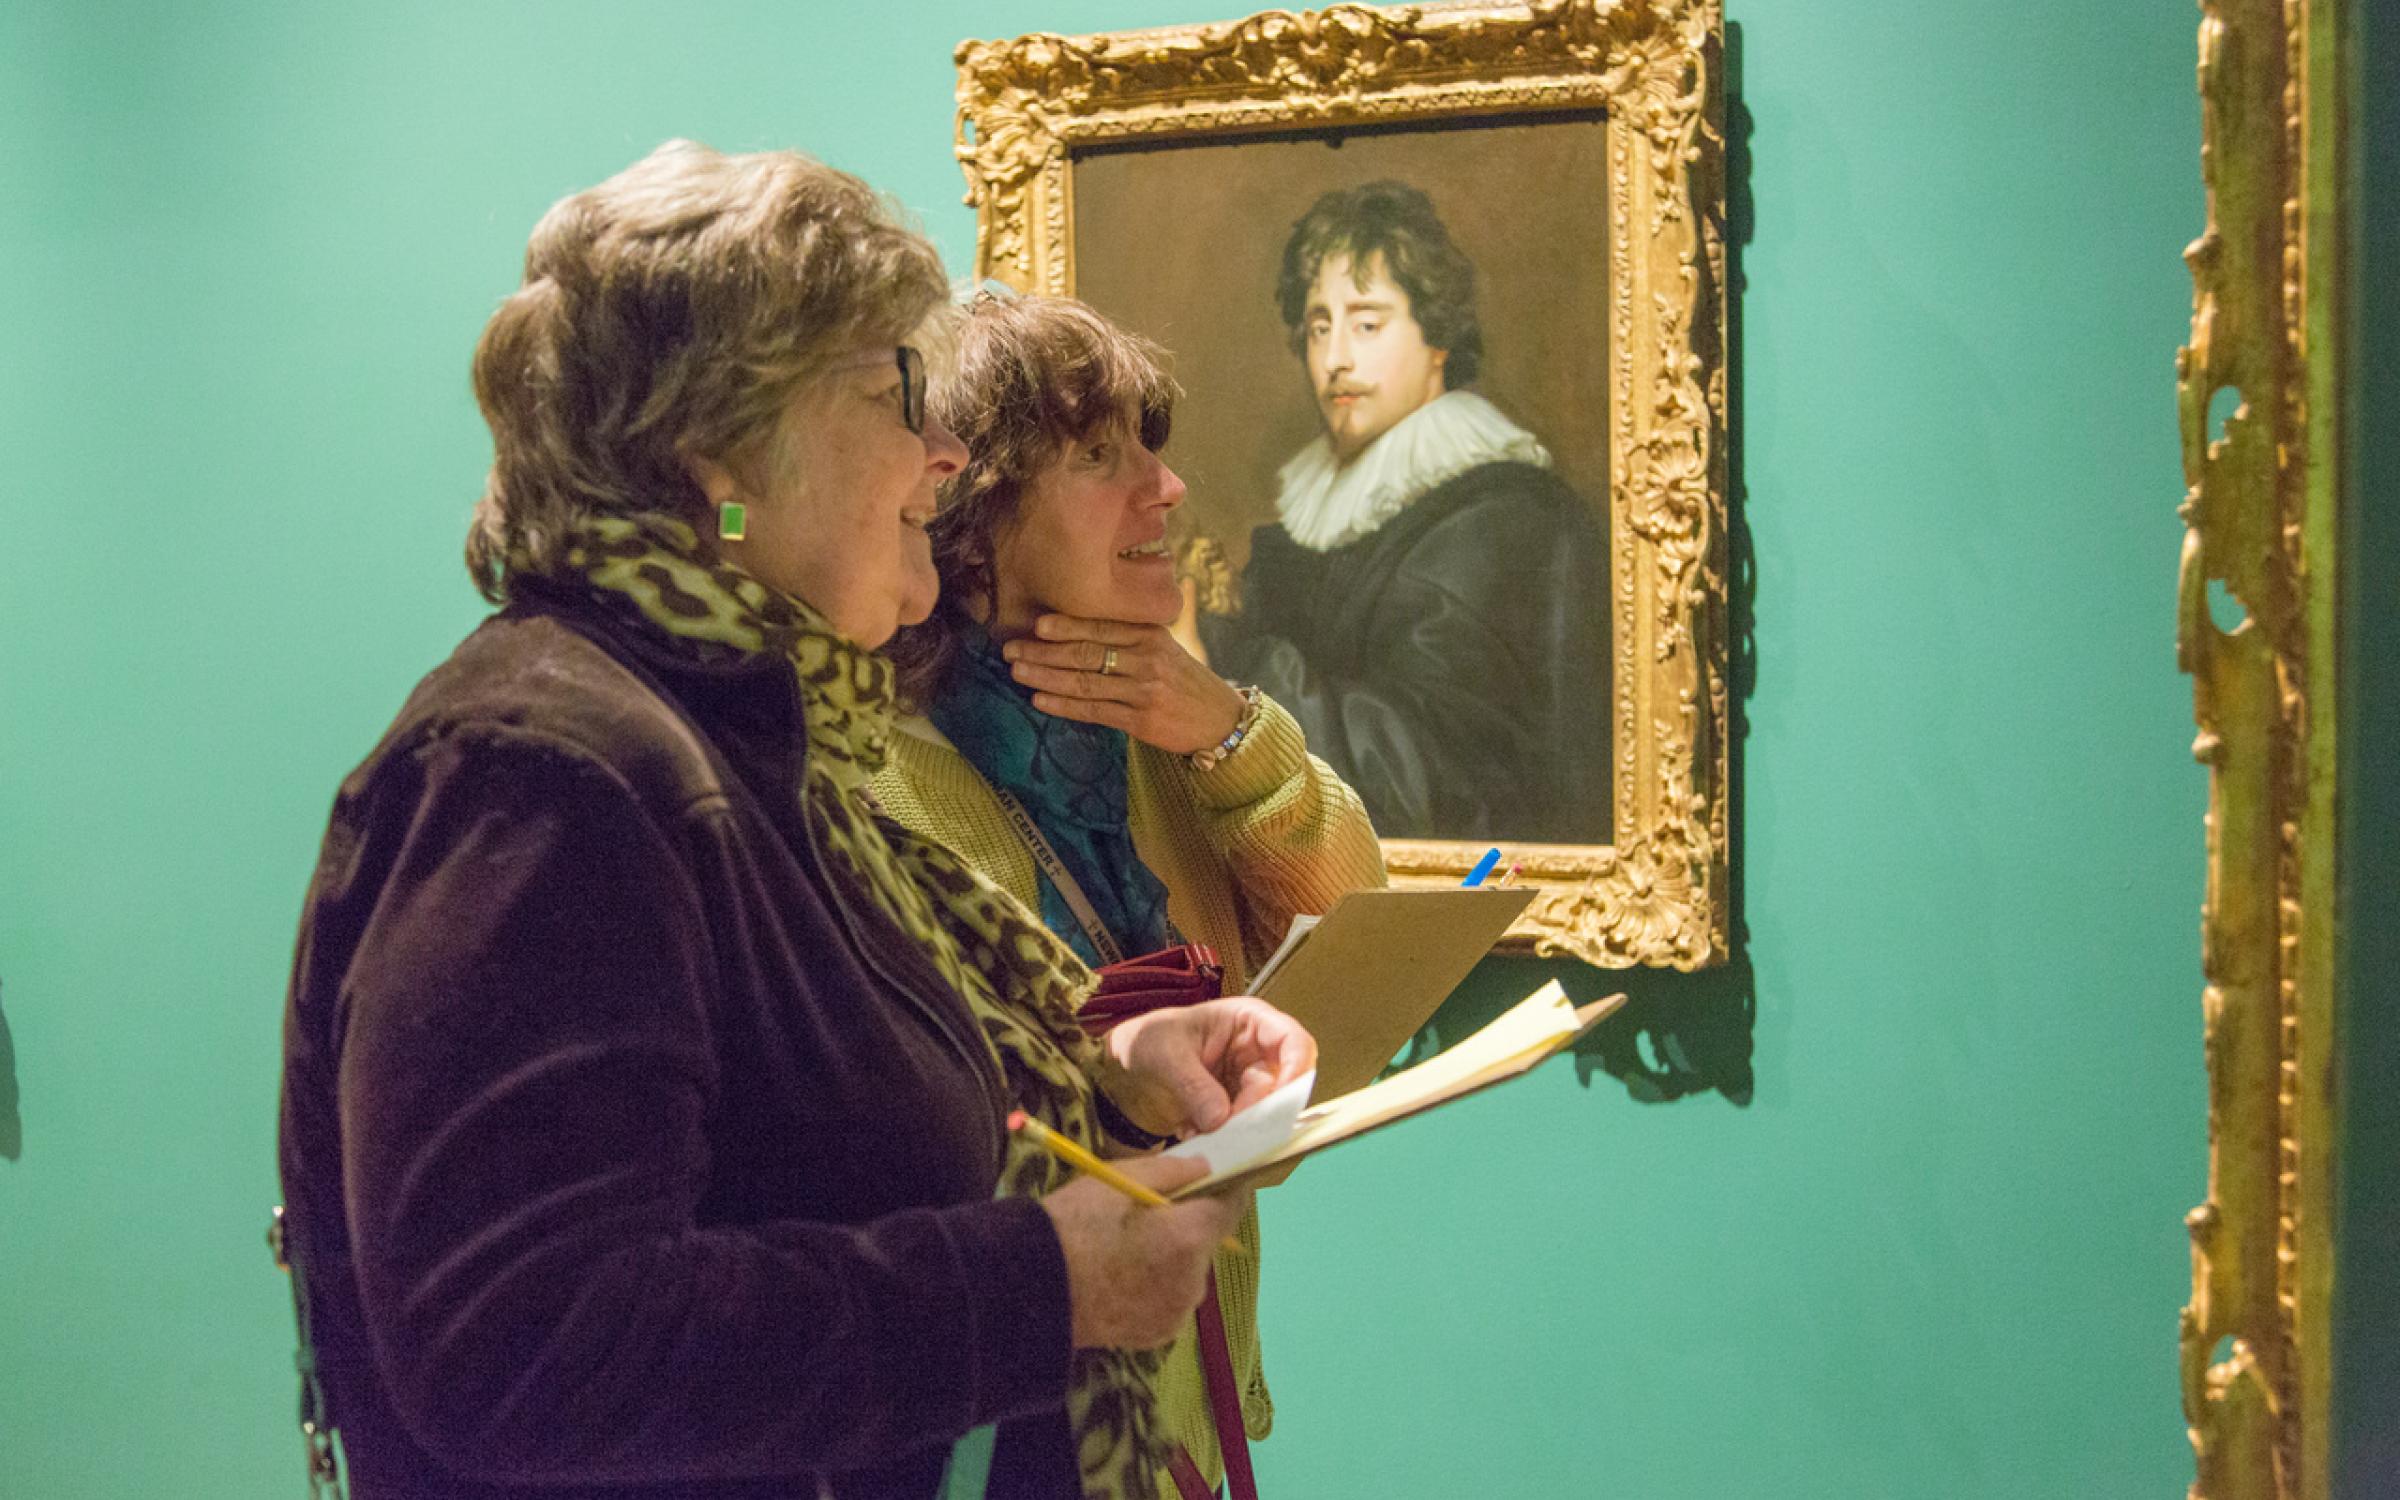 Docents in Galleries